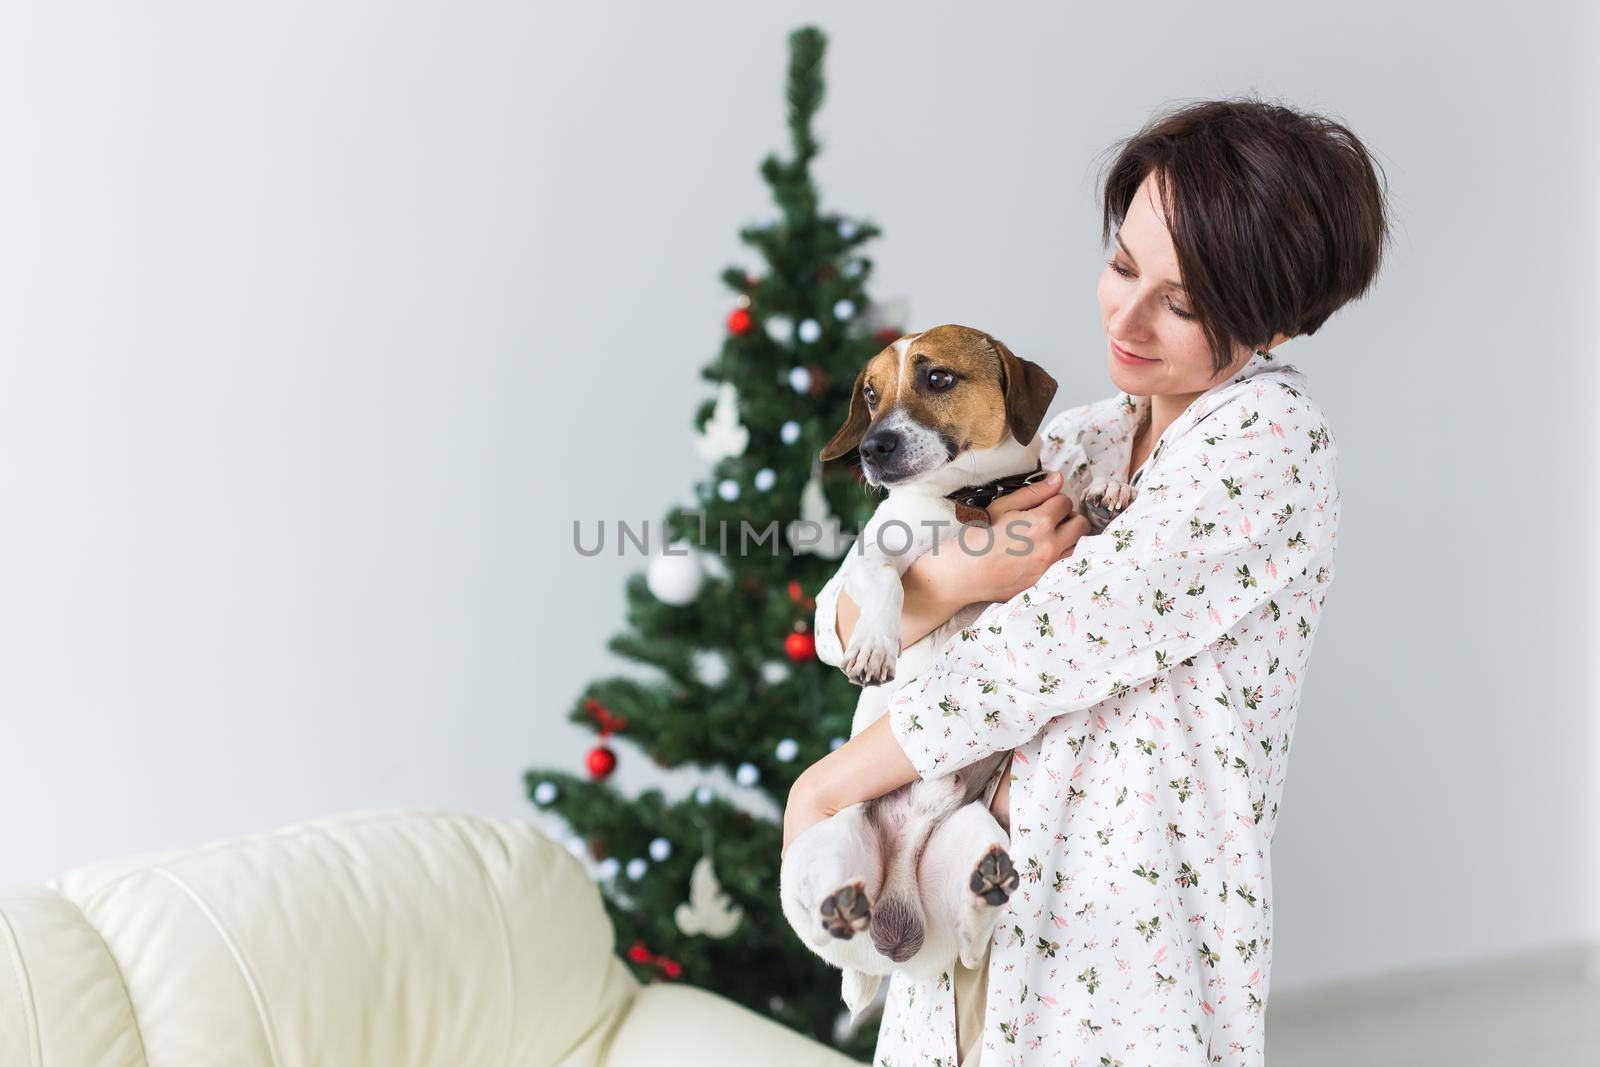 Happy woman with dog. Christmas tree with presents under it. Decorated living room by Satura86